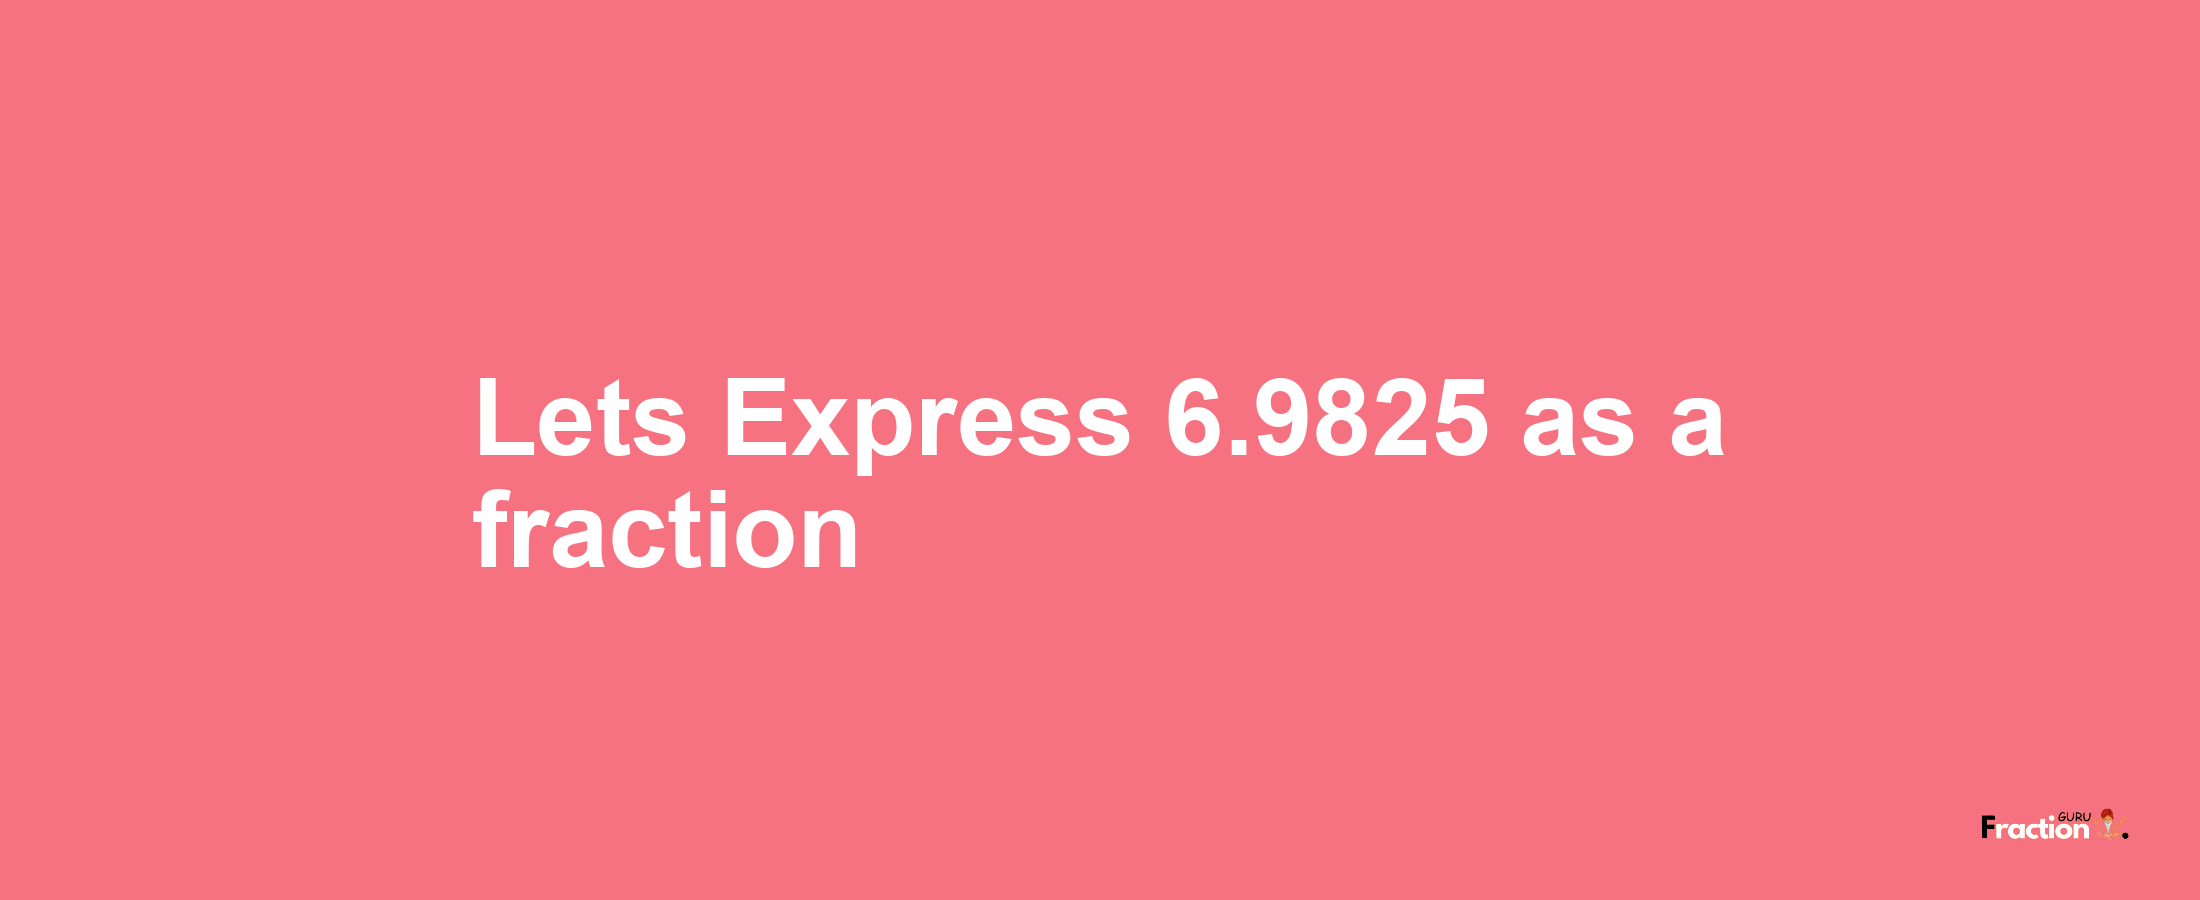 Lets Express 6.9825 as afraction